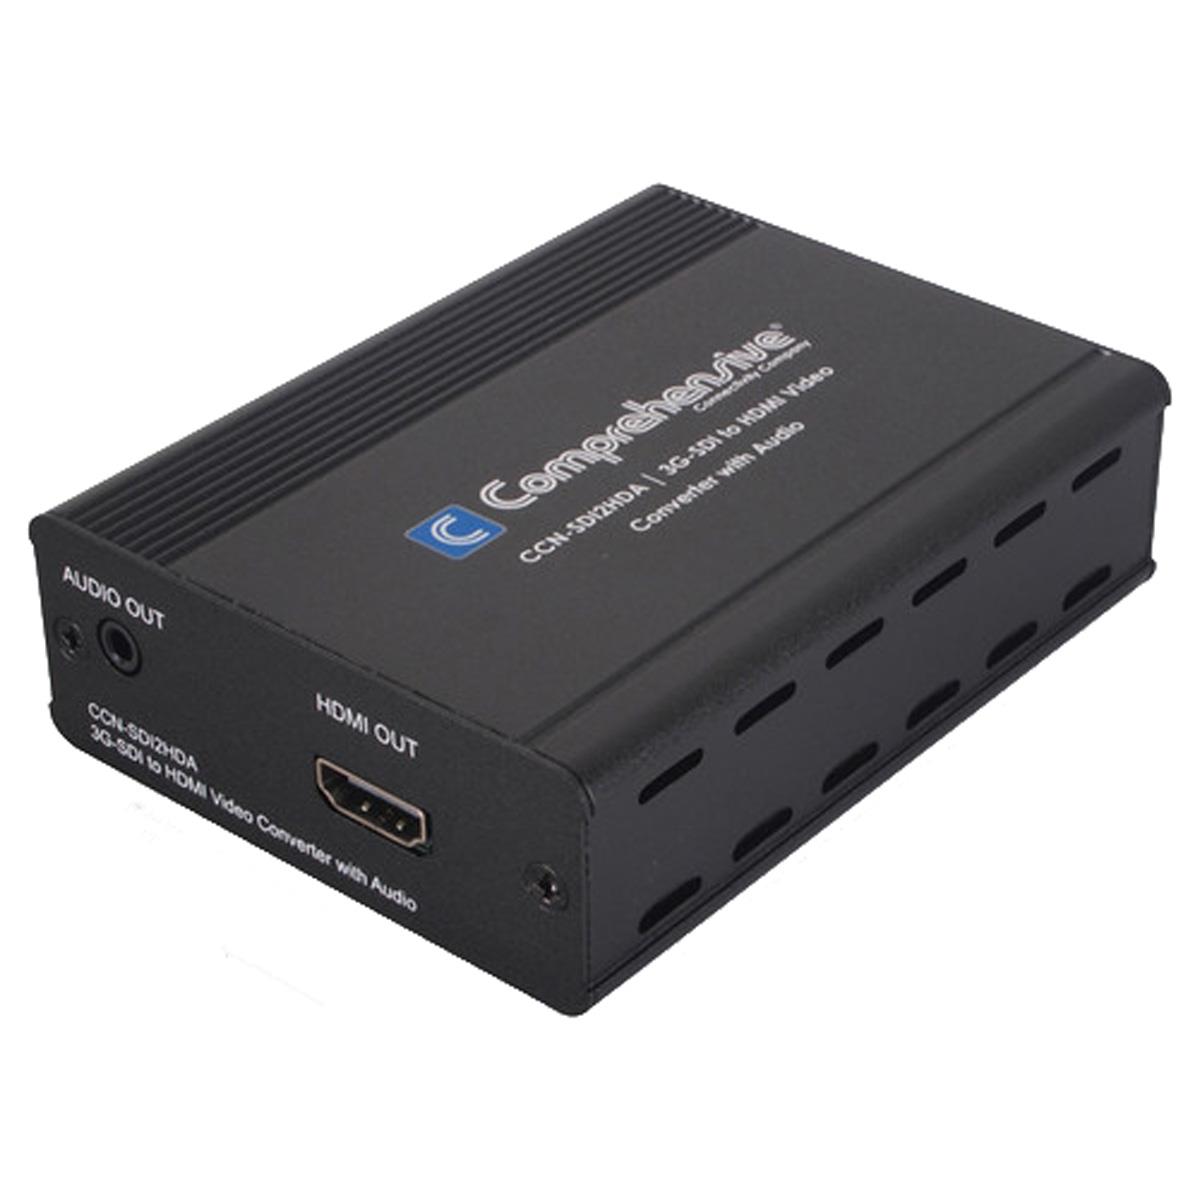 Image of Comprehensive Pro AV/IT 3G-SDI to HDMI Video Converter with Audio